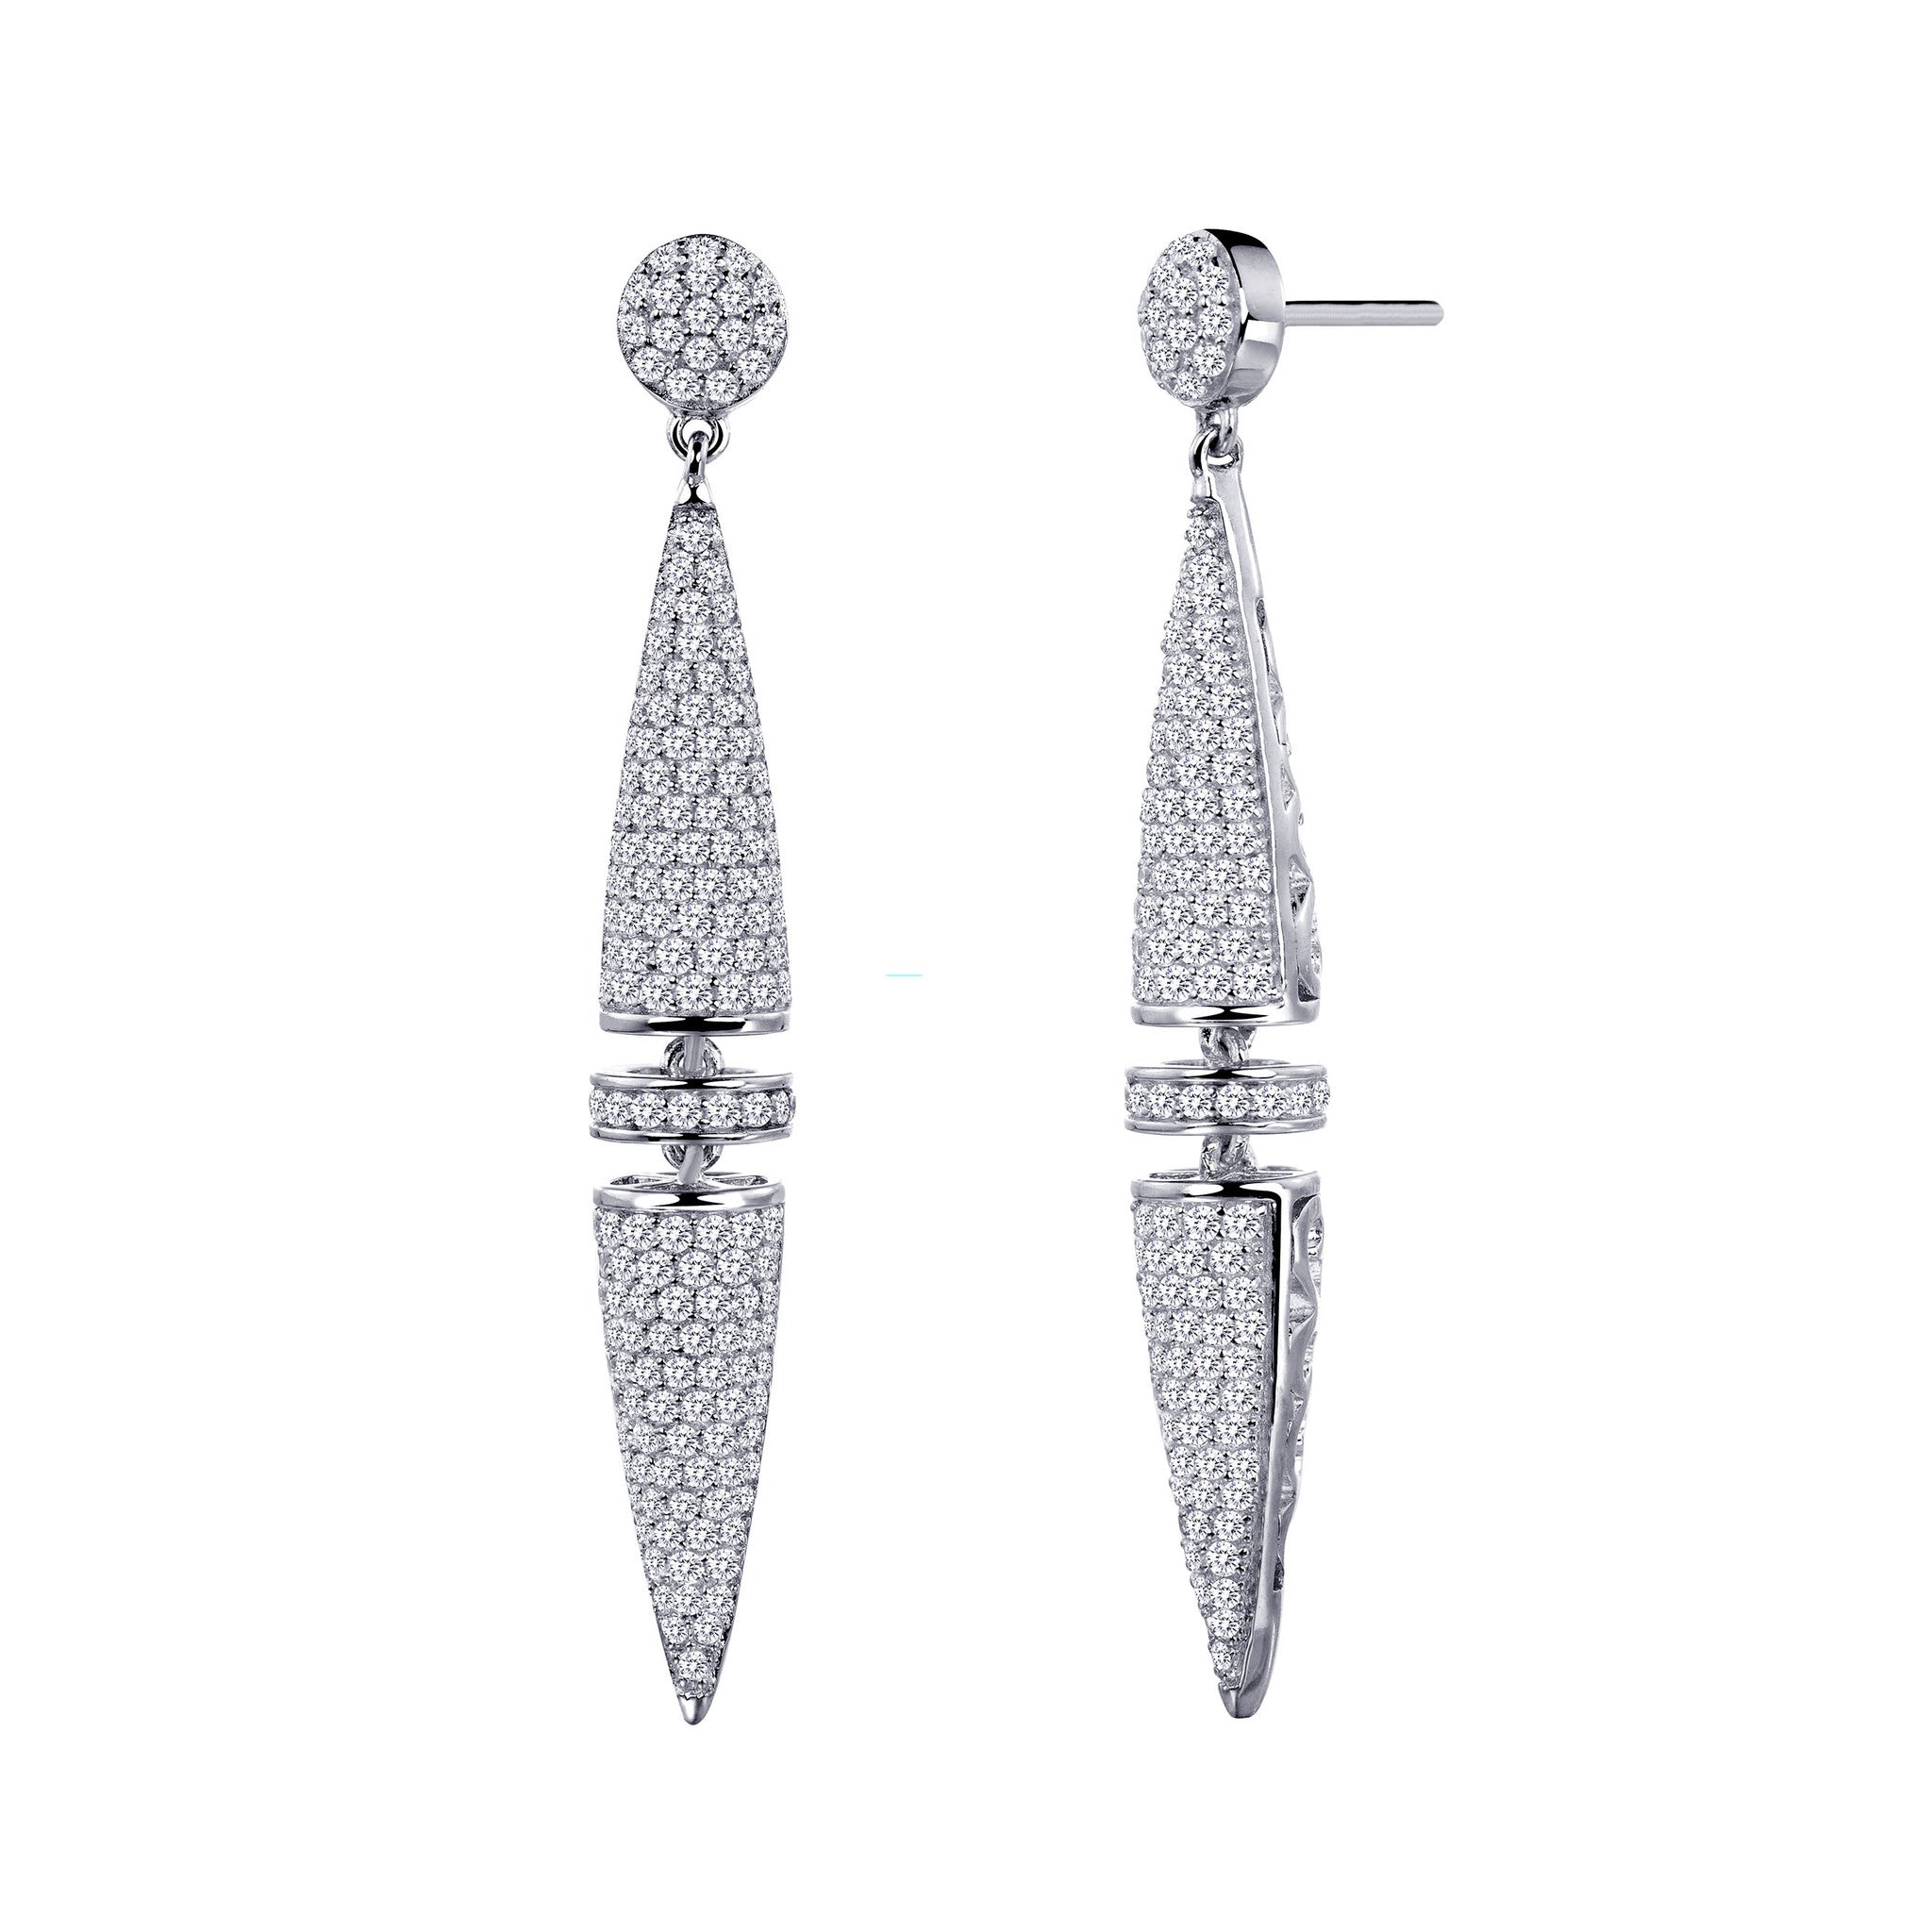 Sterling Silver and Platinum Earrings by Lafonn